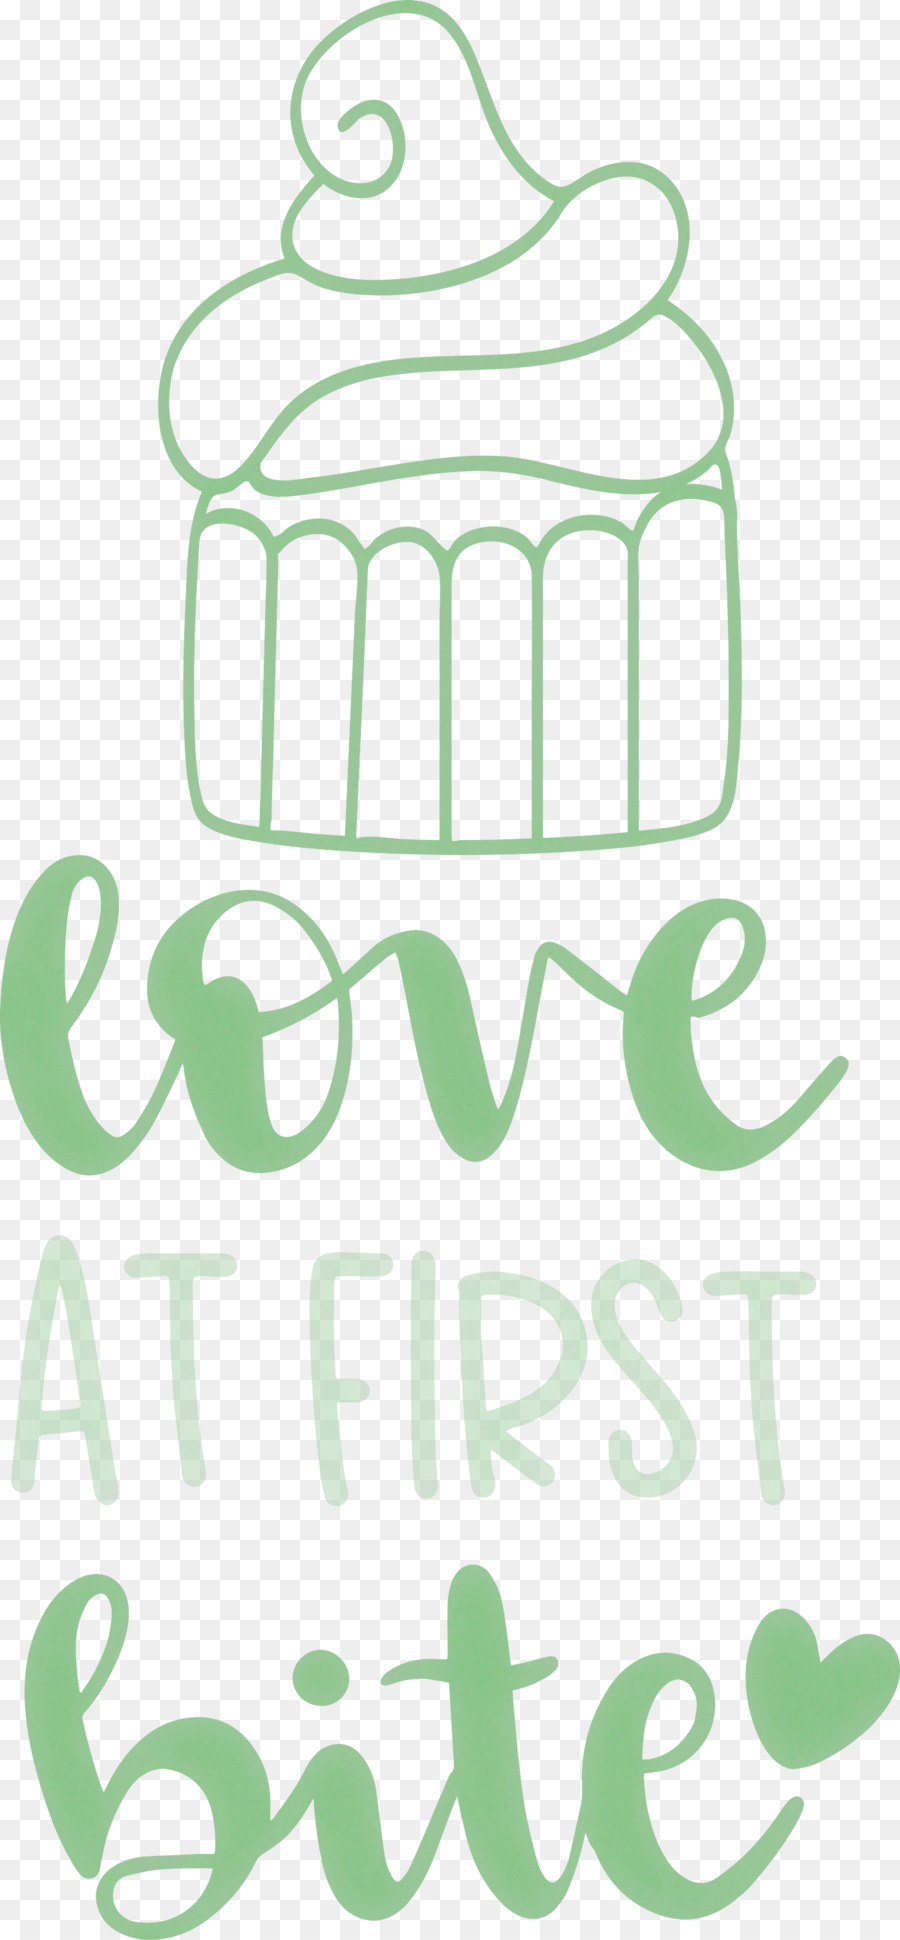 Love At First Bite Cooking Cucina - 